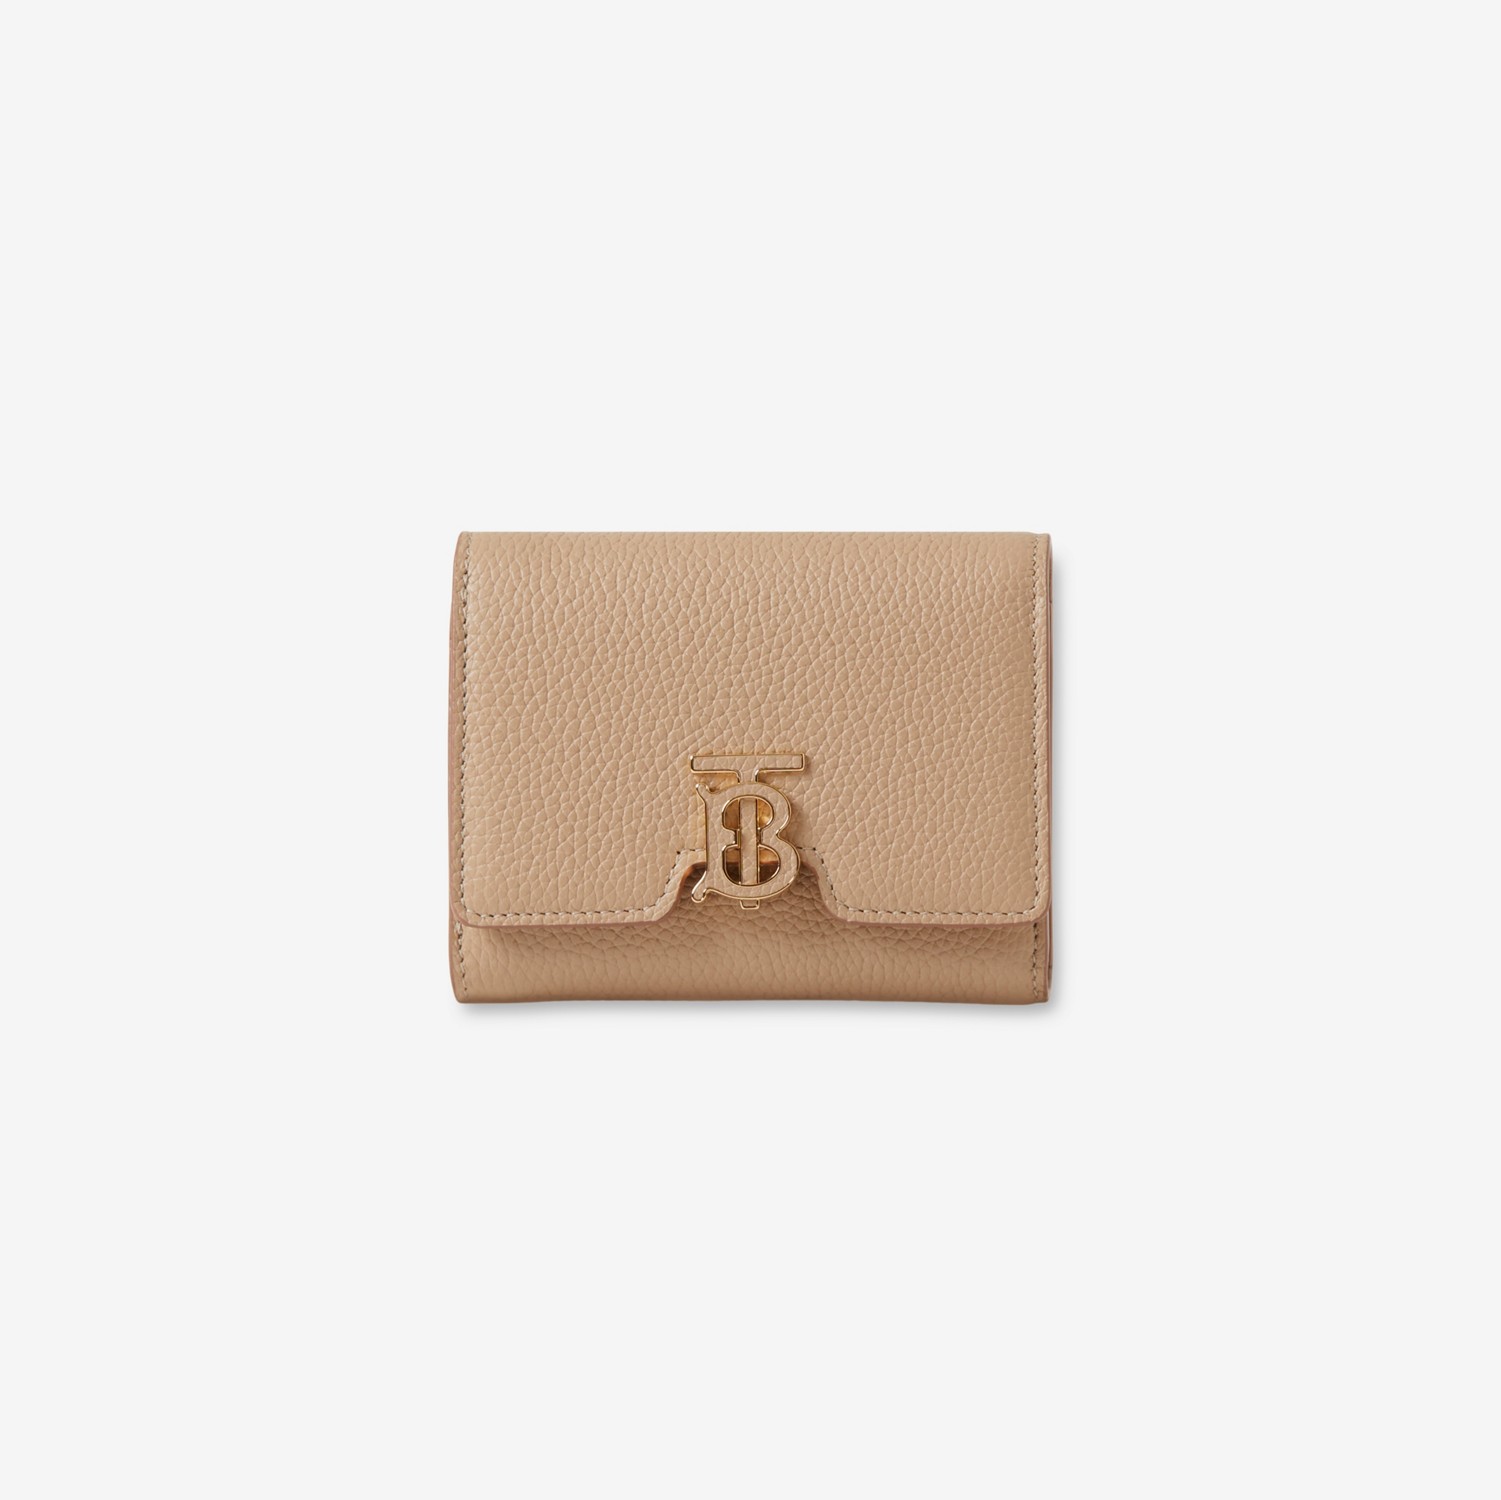 TB Compact Wallet in Oat beige - Women, Leather | Burberry® Official